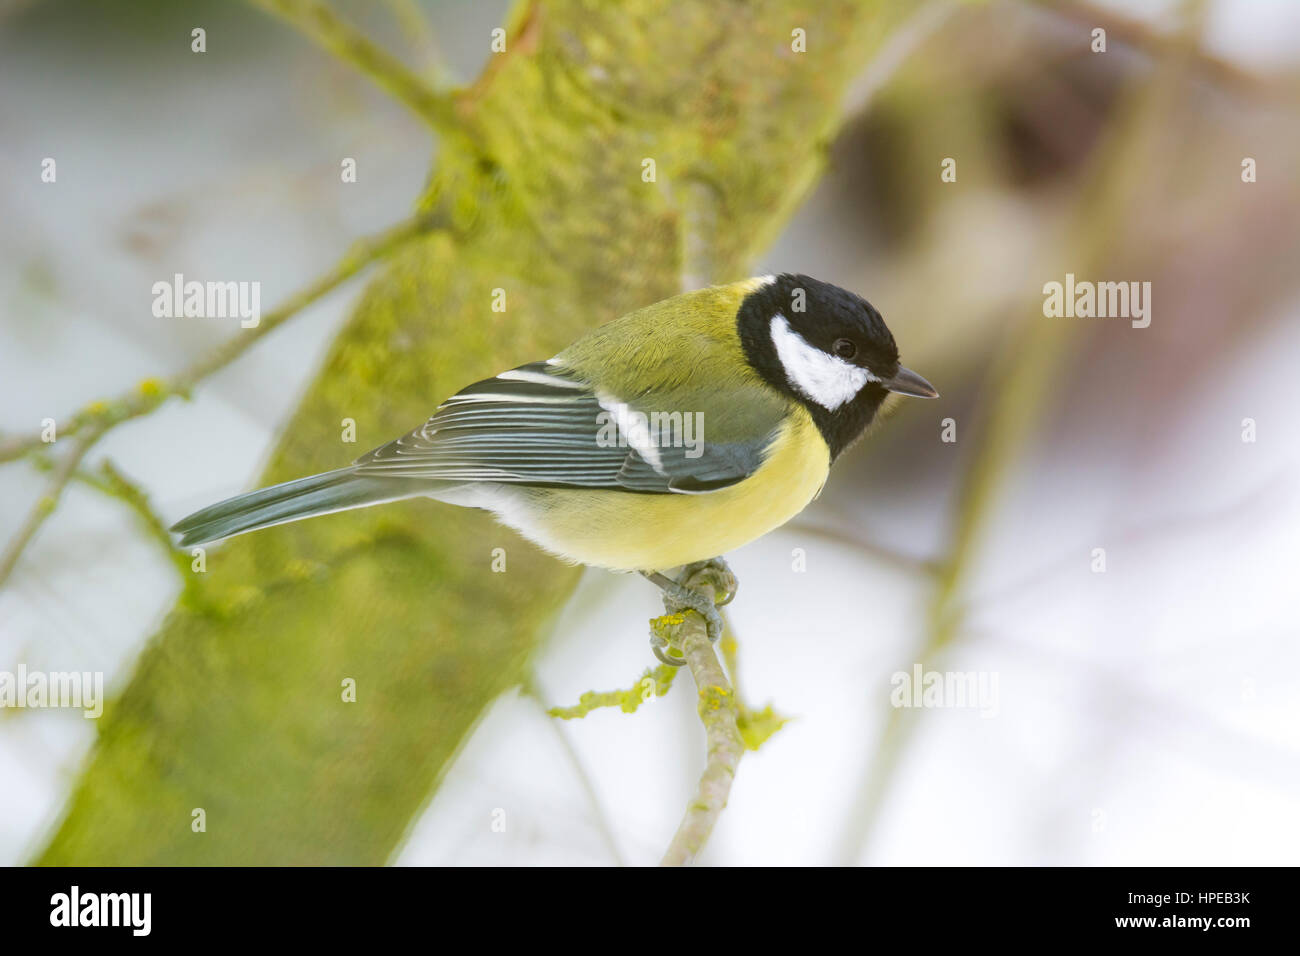 Closeup of a Great tit bird sitting on the branch of a tree Stock Photo